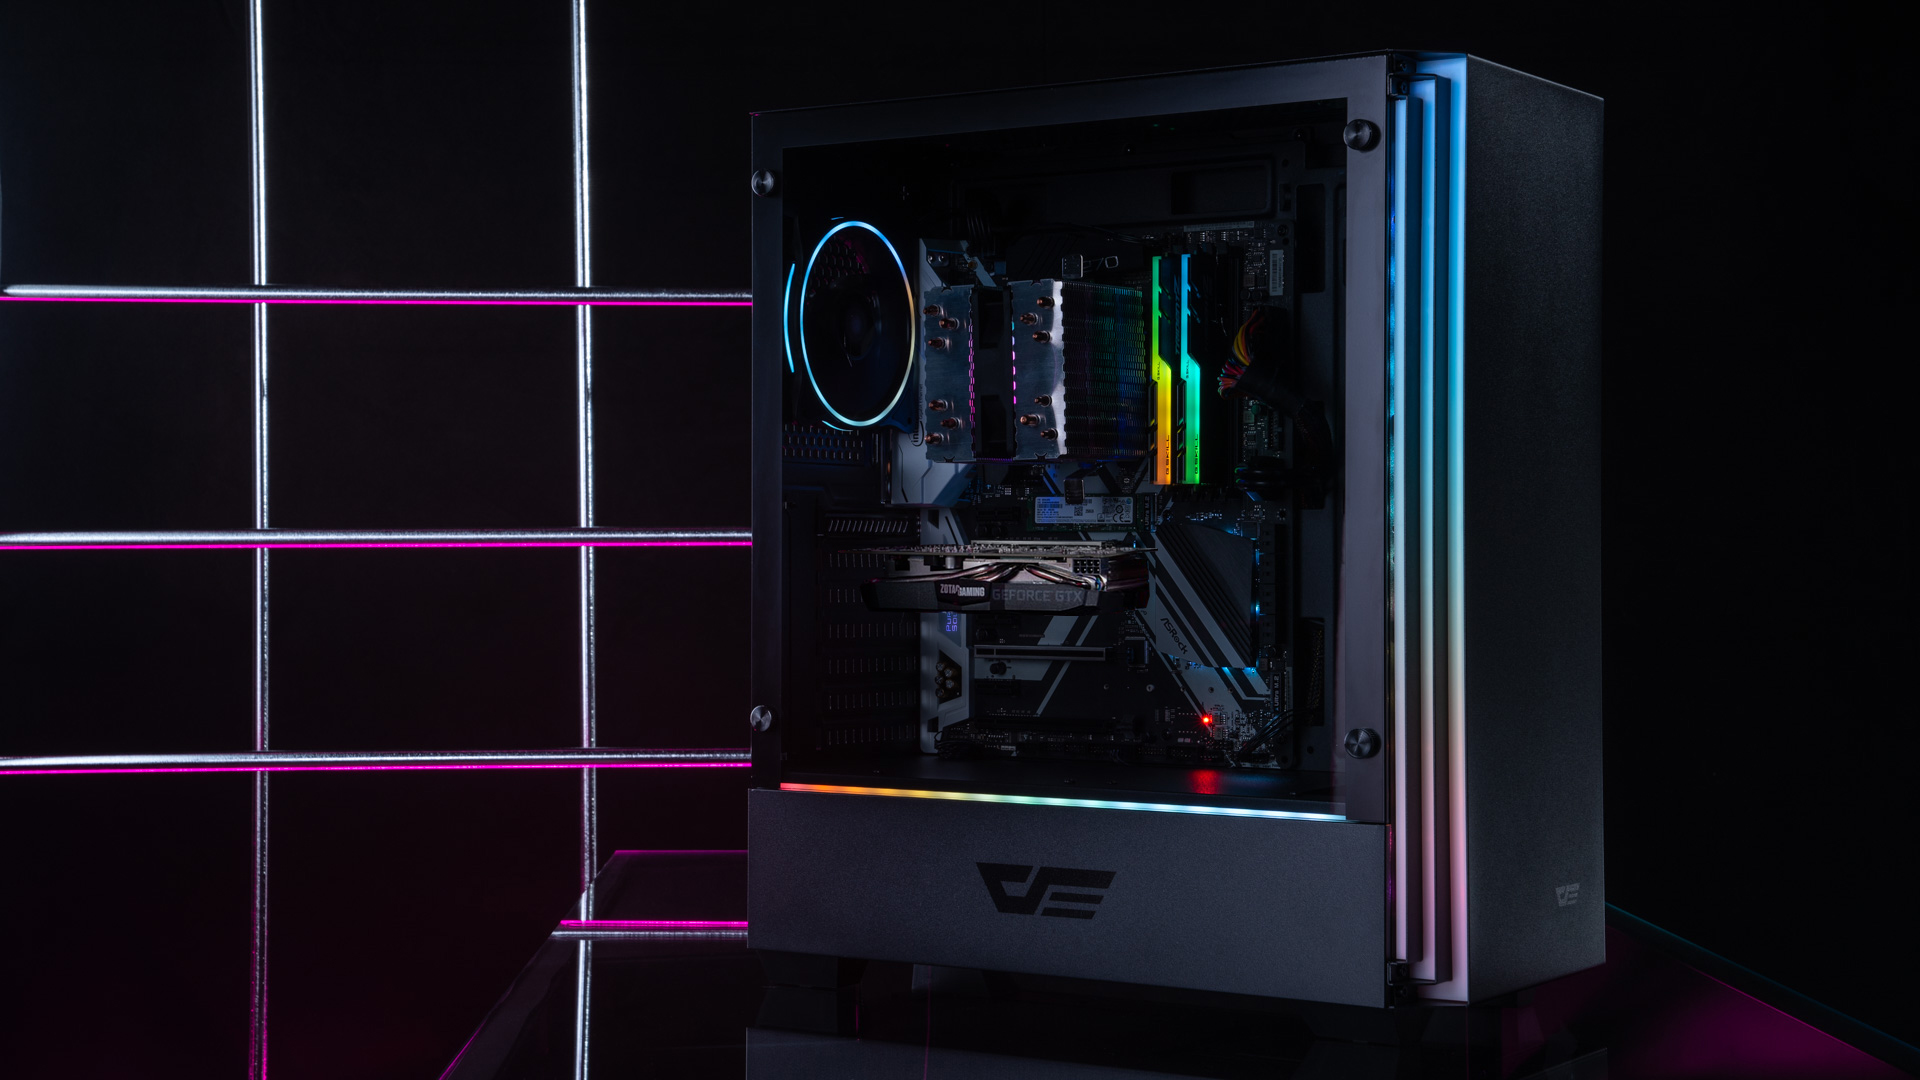 darkFlash once again impresses with their beautiful and reliable RGB components,, like the J11 case and L6 cooling fan.